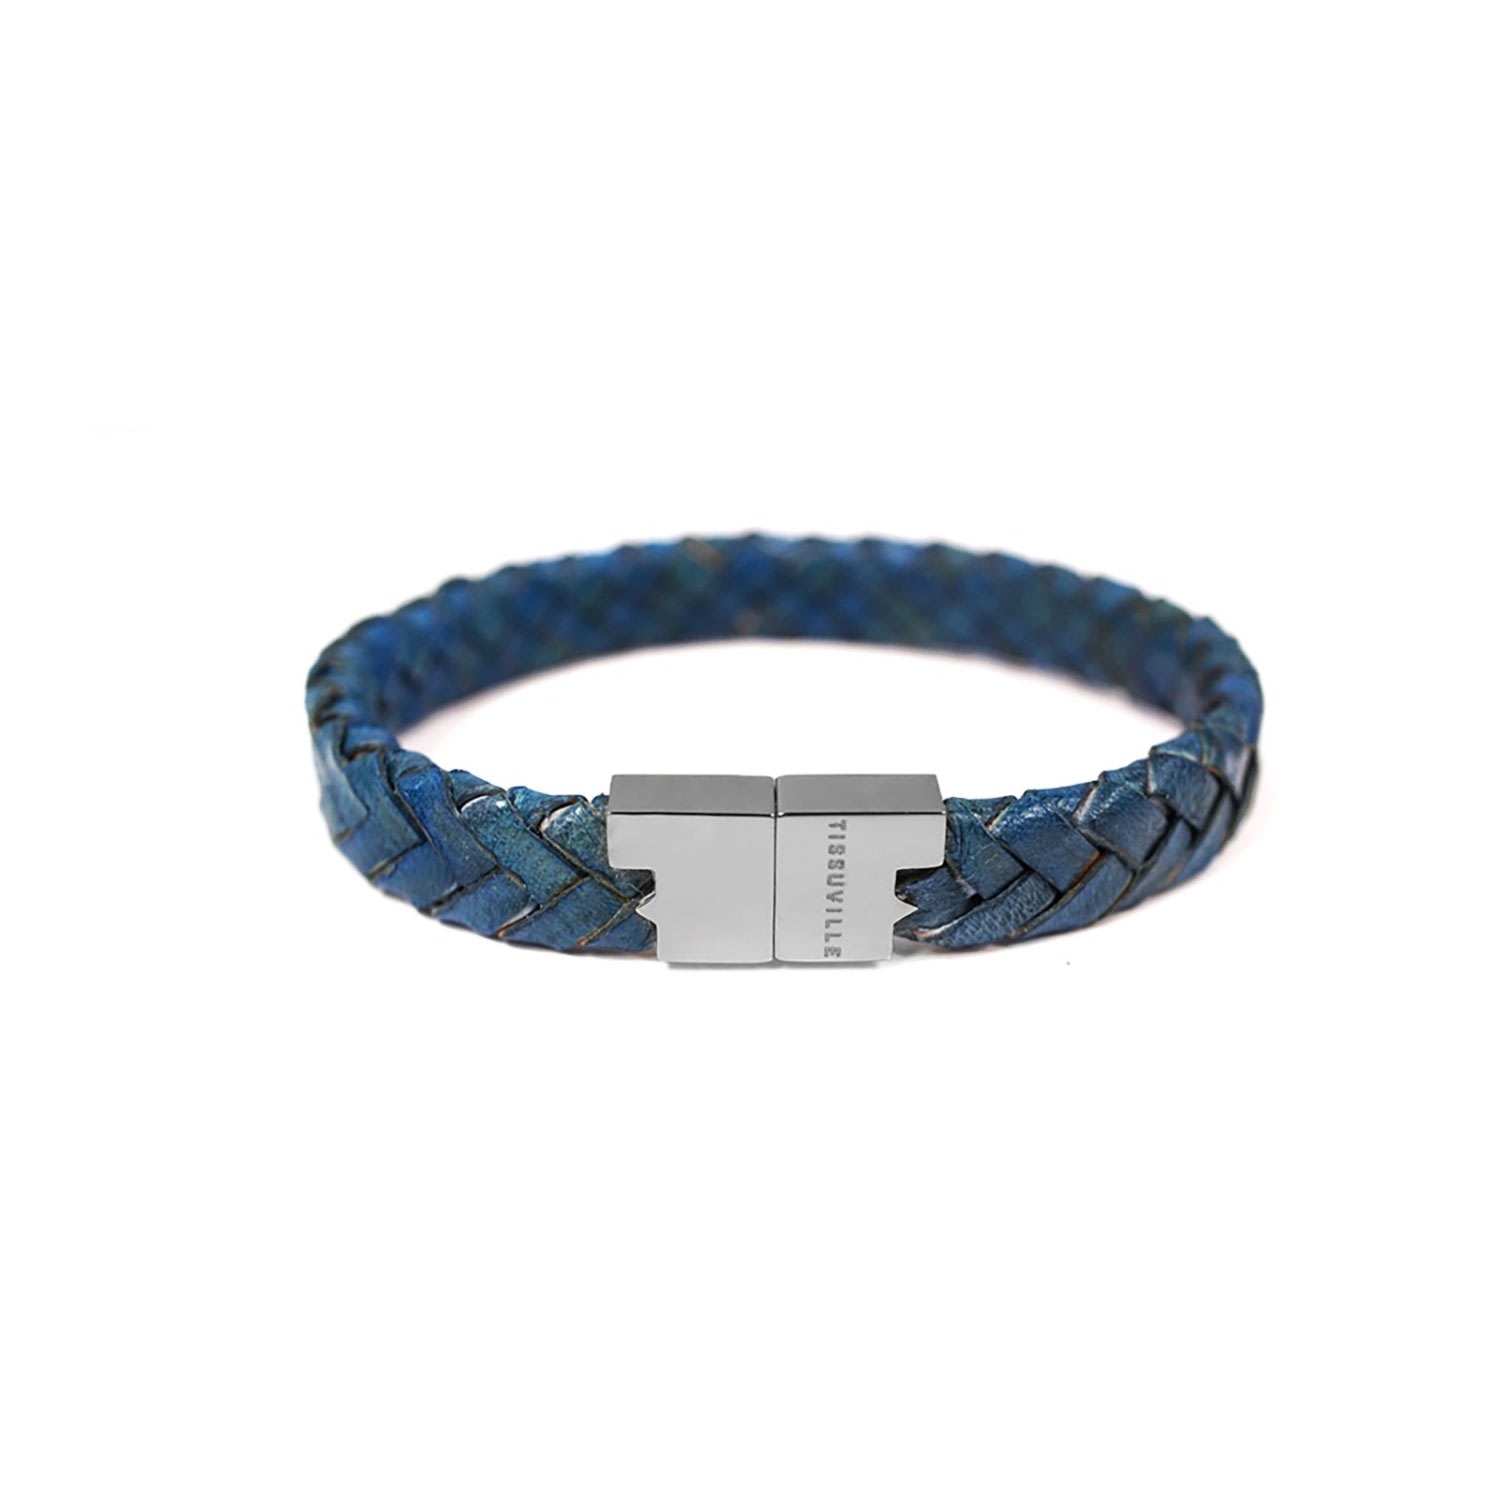 Men's Blue Braided Leather Bracelet With Silver-Tone Hardware - Serac Tissuville